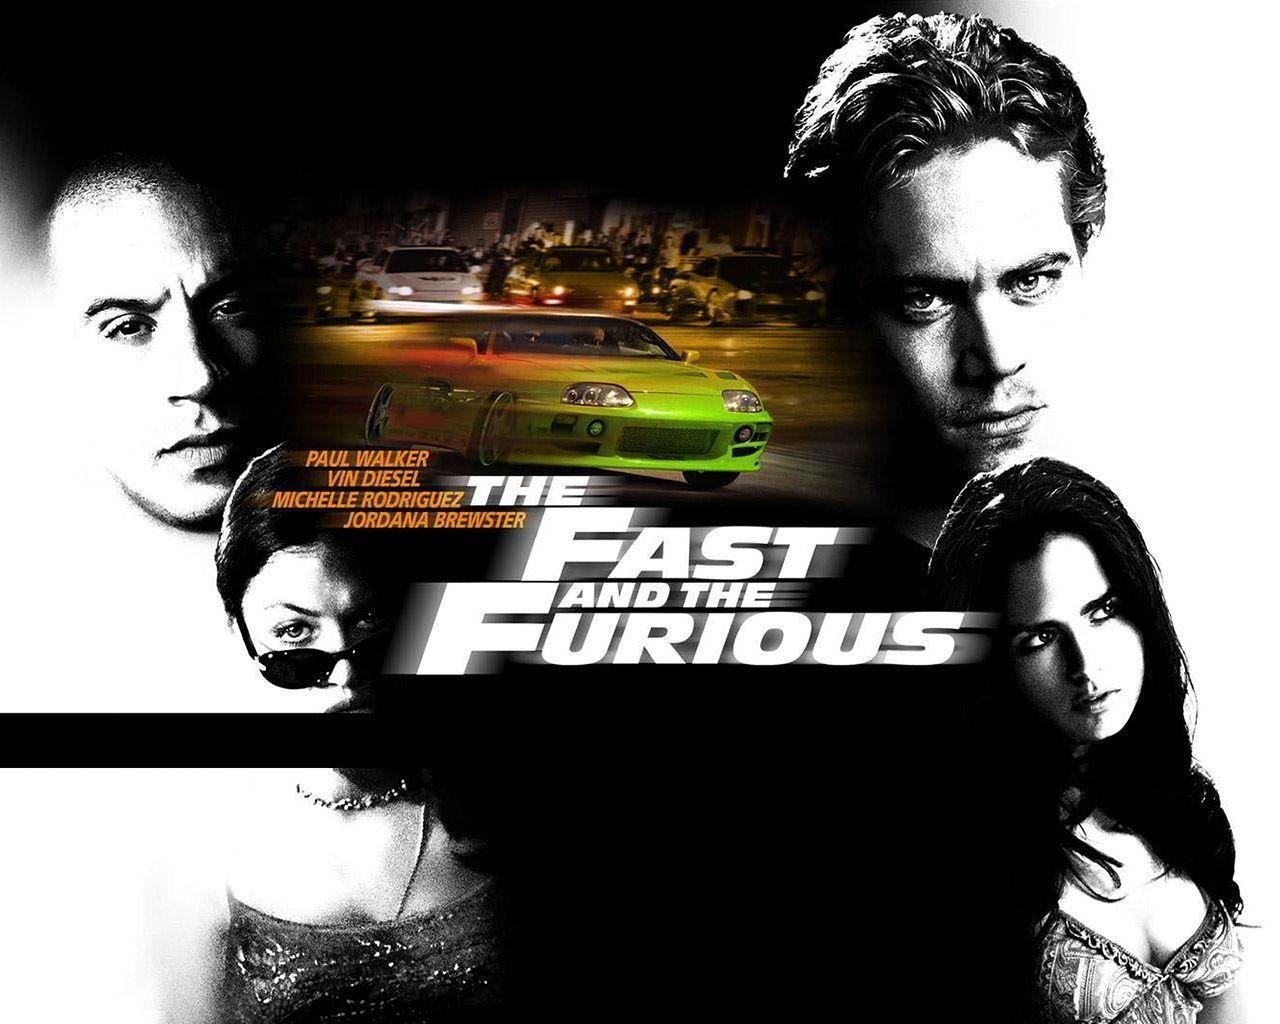 Fast and Furious 1 Wallpaper Free Fast and Furious 1